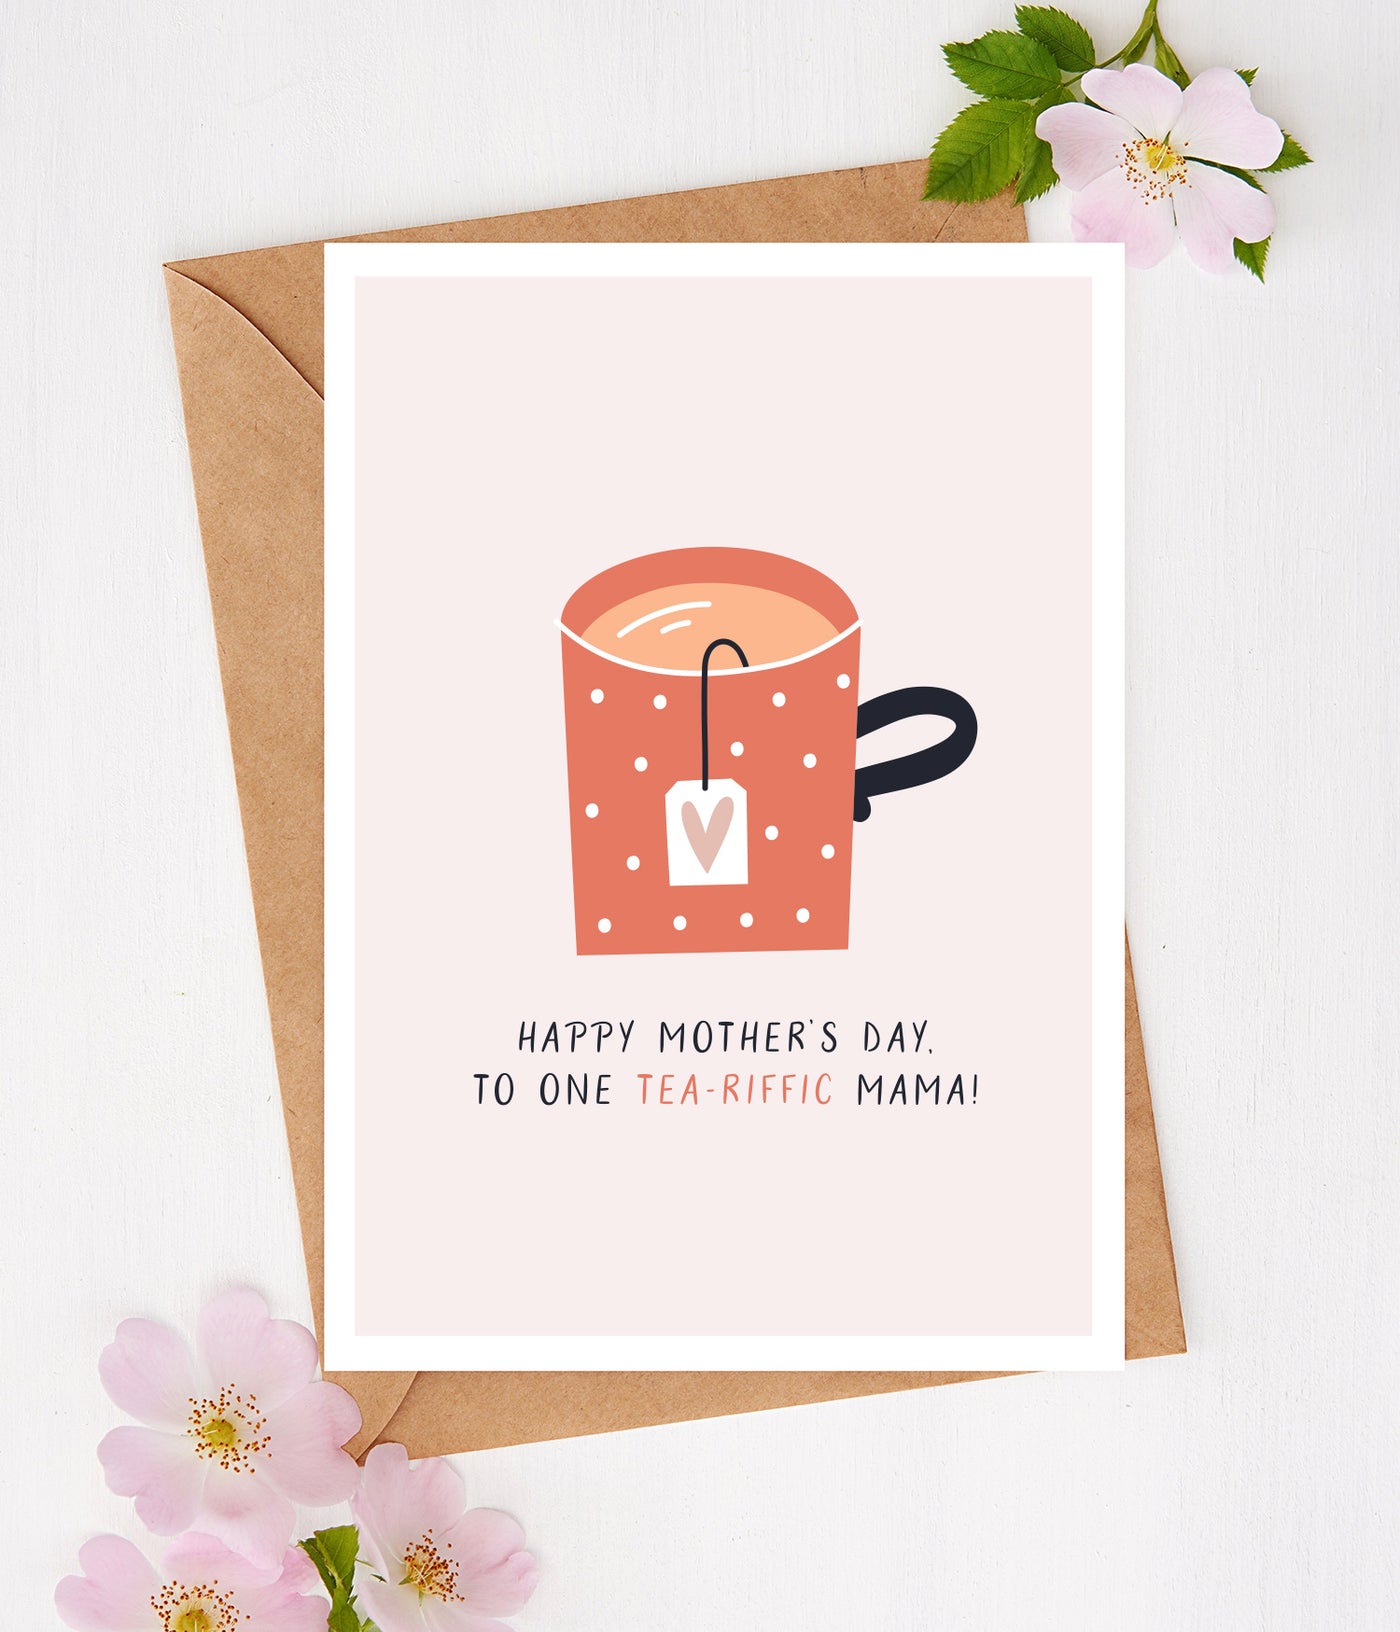 'Tea-riffic Mama' Mother's Day Card